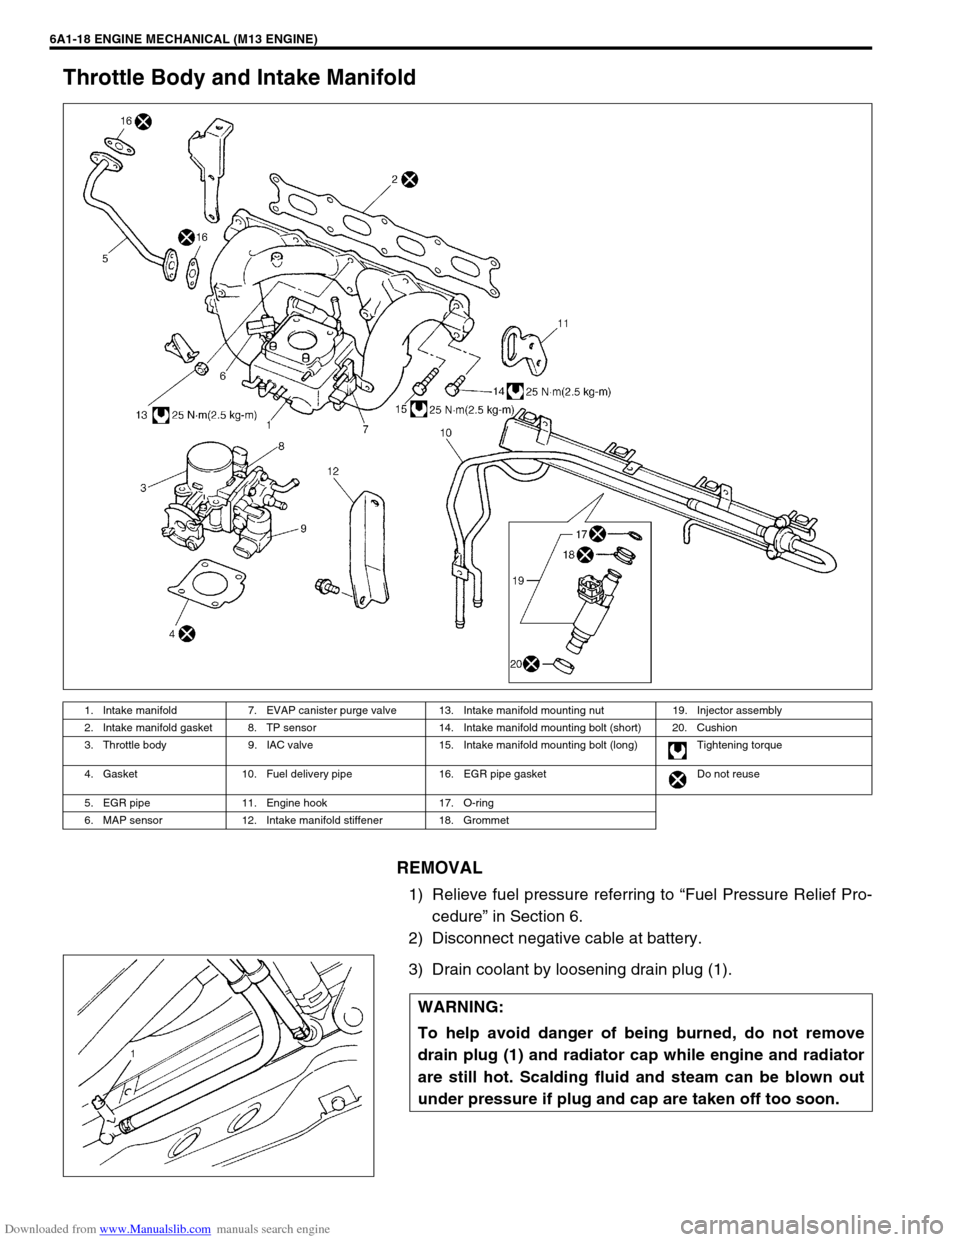 SUZUKI JIMNY 2005 3.G Service Workshop Manual Downloaded from www.Manualslib.com manuals search engine 6A1-18 ENGINE MECHANICAL (M13 ENGINE)
Throttle Body and Intake Manifold
REMOVAL
1) Relieve fuel pressure referring to “Fuel Pressure Relief P